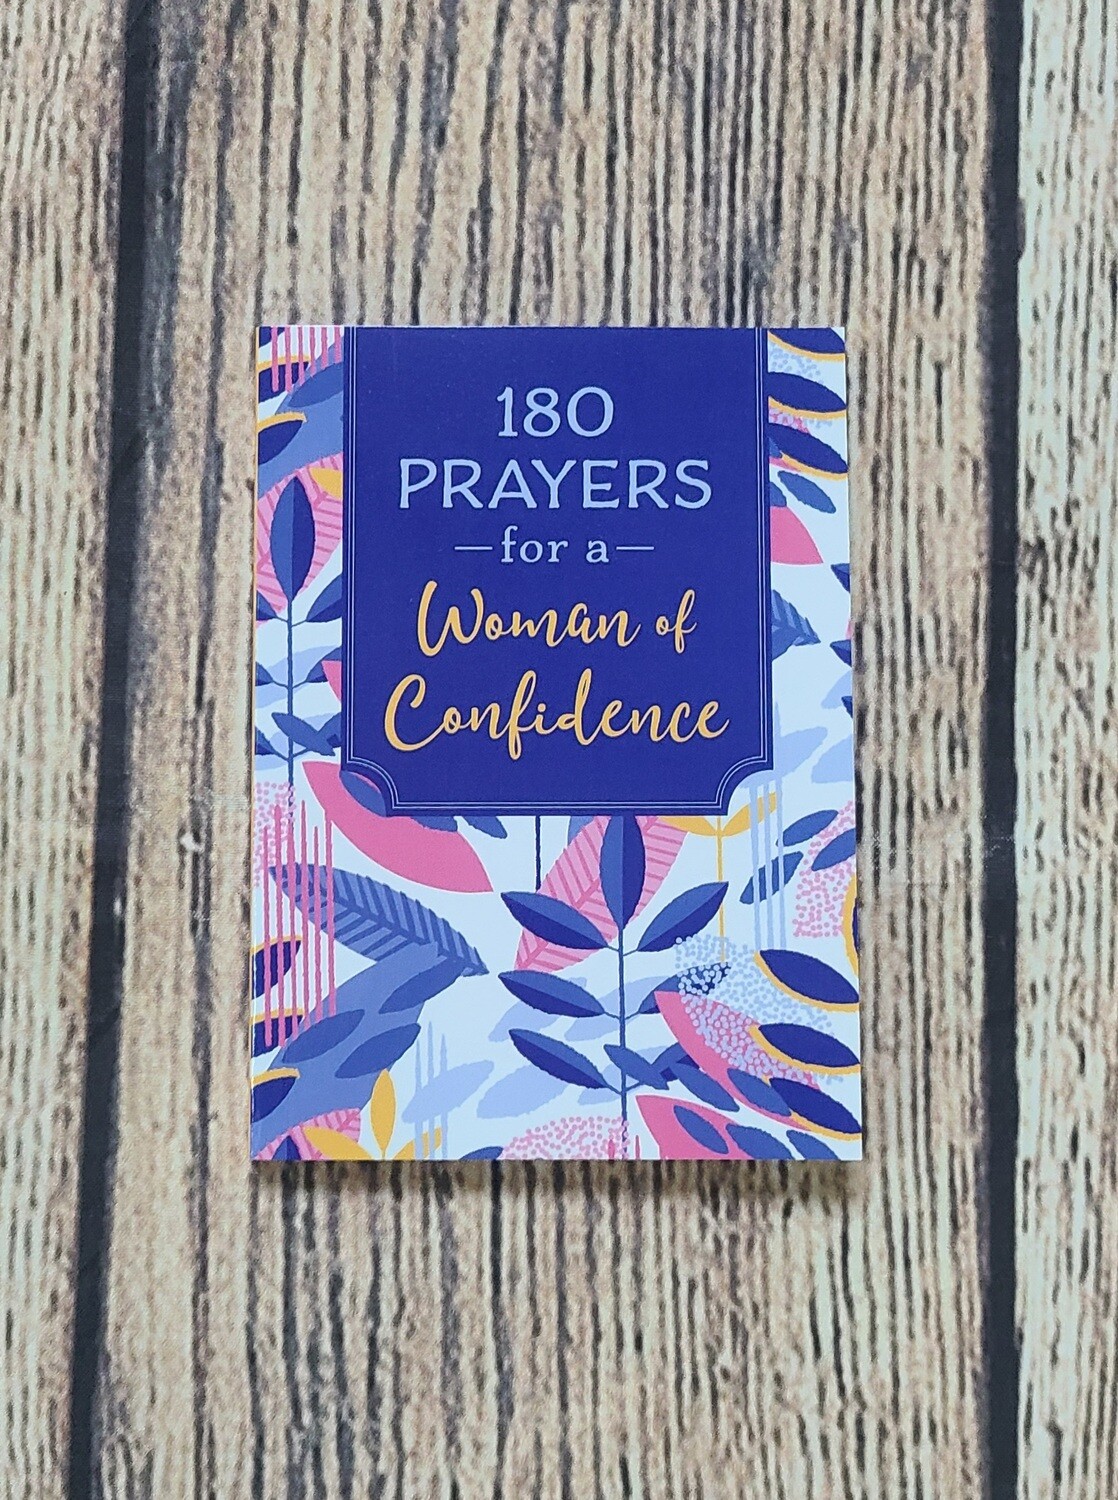 180 Prayers for a Woman of Confidence by Ellie Zumbach - Paperback - New